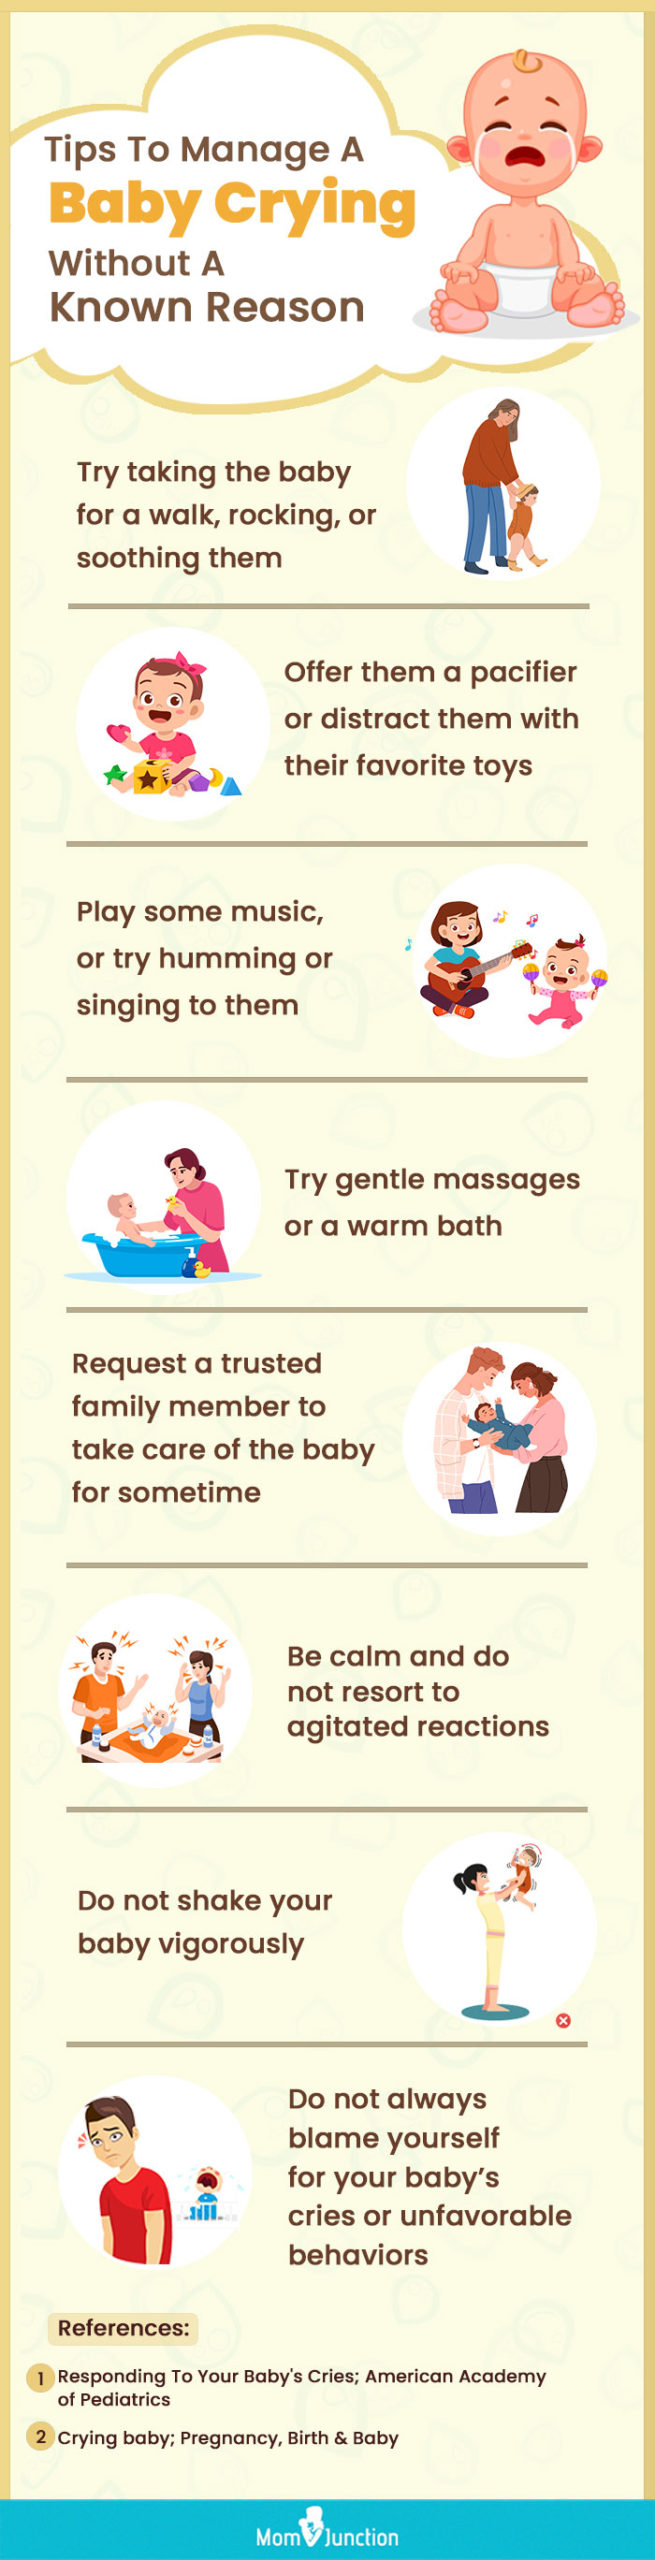 tips to manage a baby crying without a known reason (infographic)